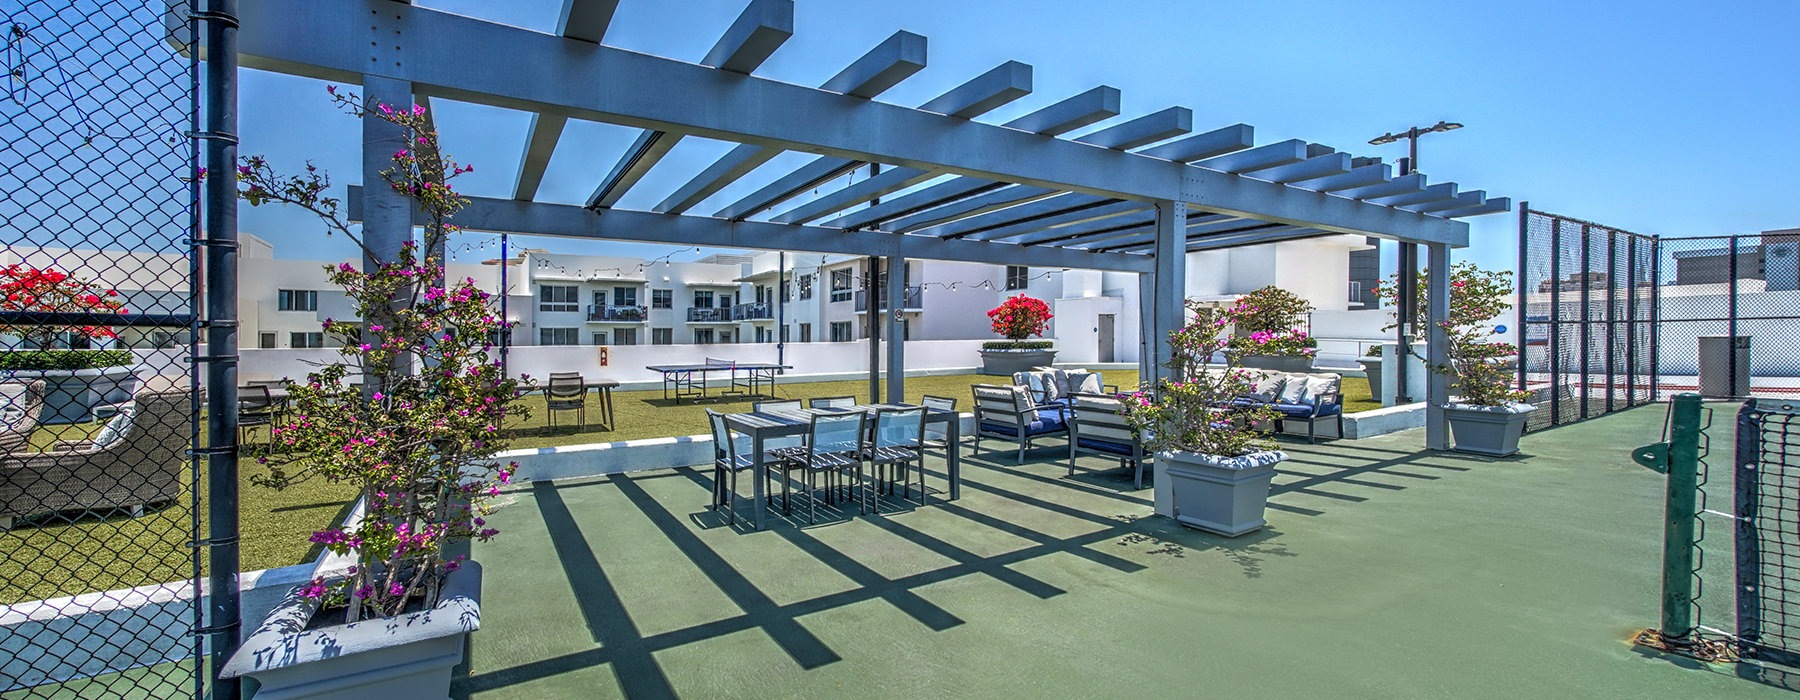 Large rooftop deck with tennis court 